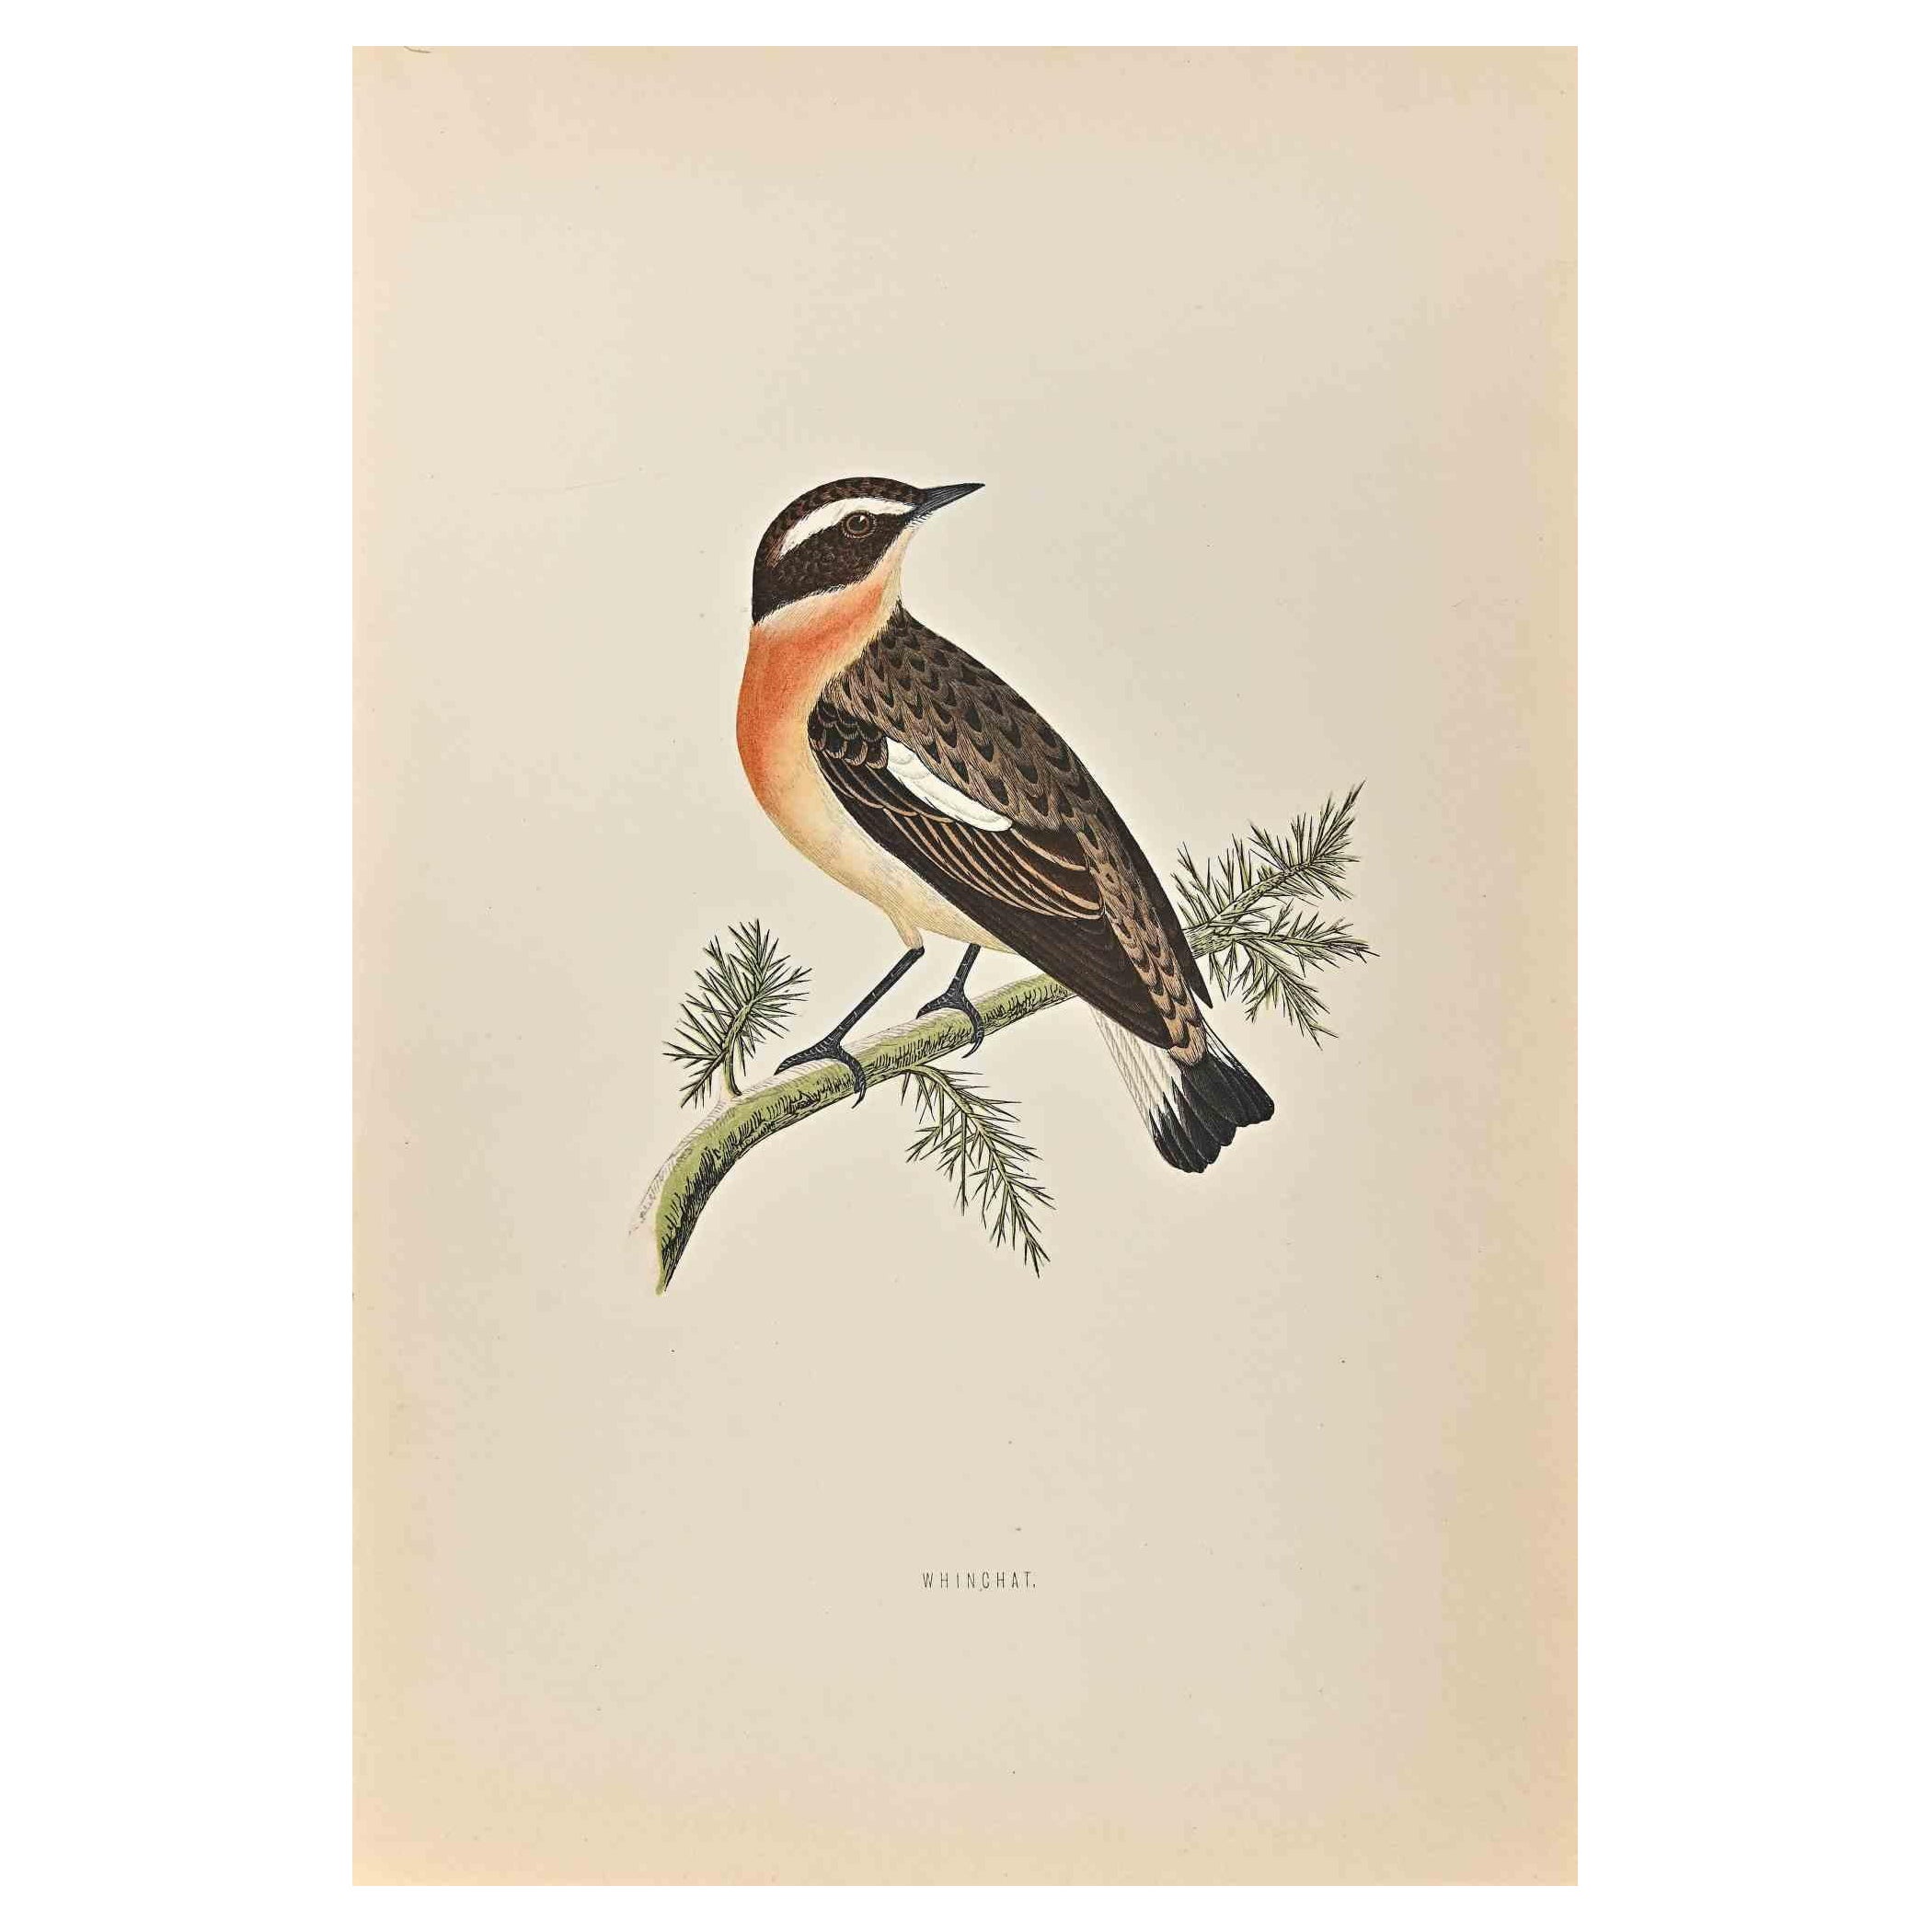 Winchat is a modern artwork realized in 1870 by the British artist Alexander Francis Lydon (1836-1917) . 

Woodcut print, hand colored, published by London, Bell & Sons, 1870.  Name of the bird printed in plate. This work is part of a print suite